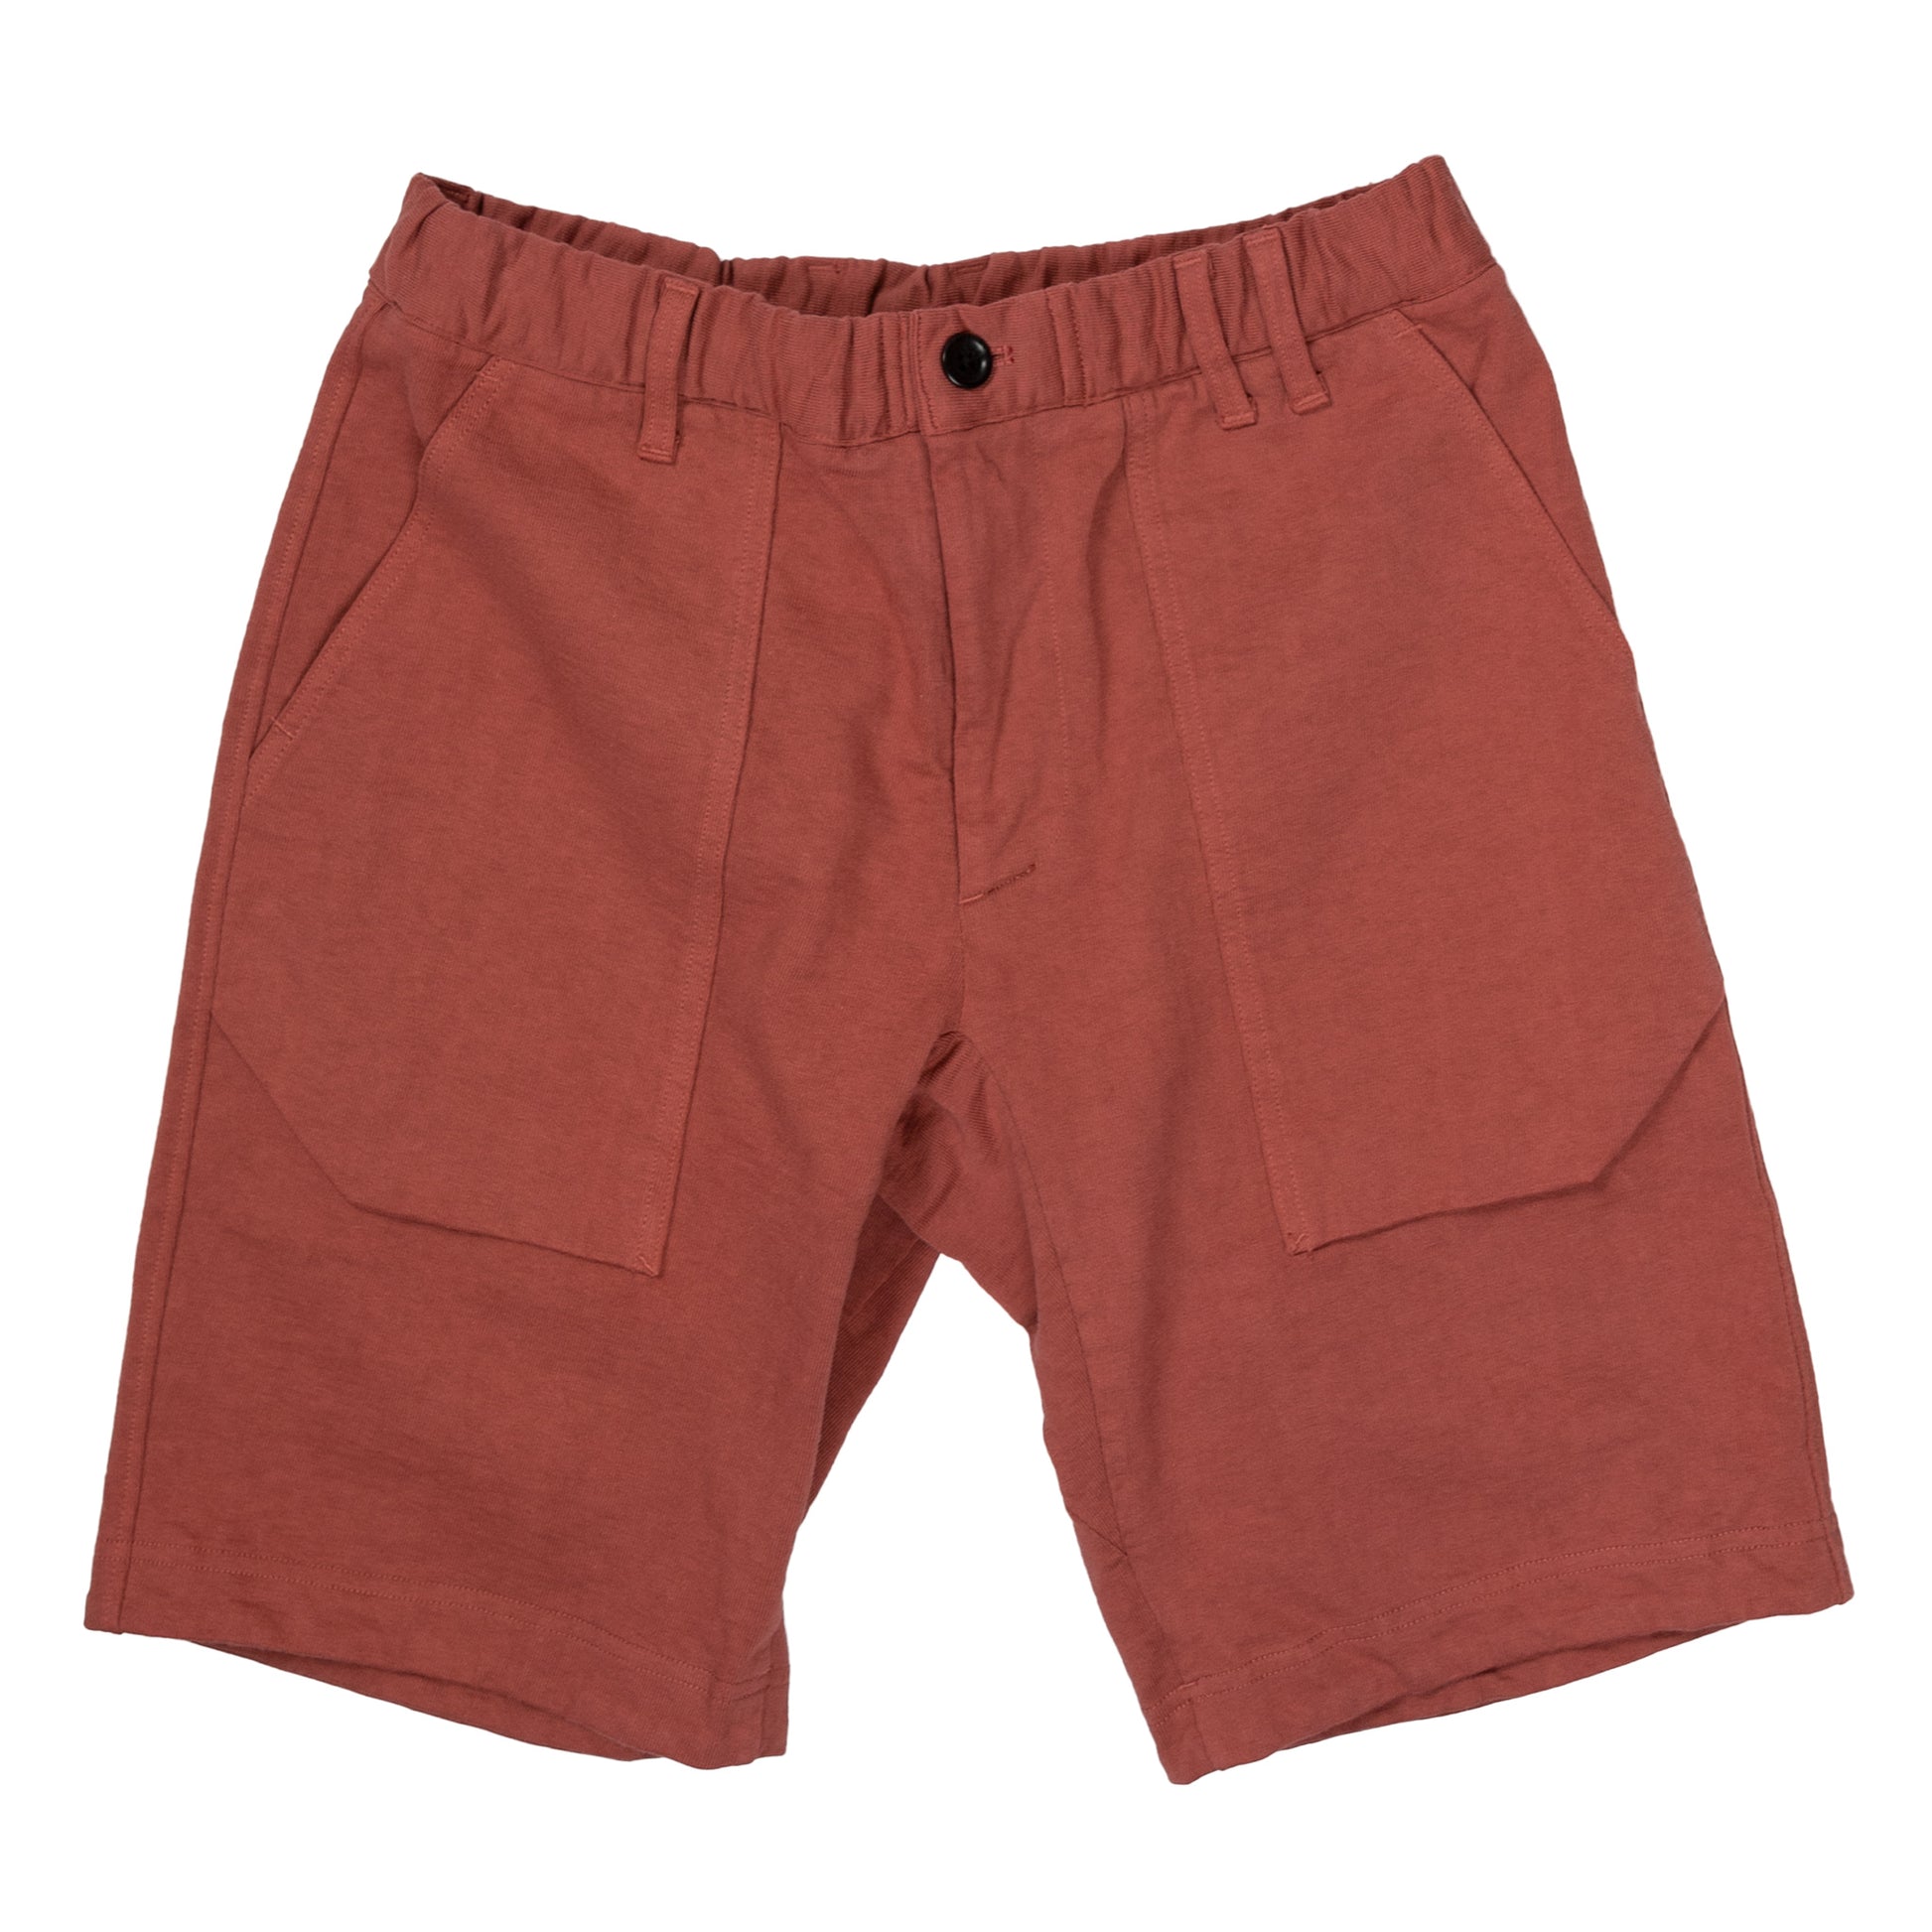 Jackman Dotsume Shorts  in Dry Rose